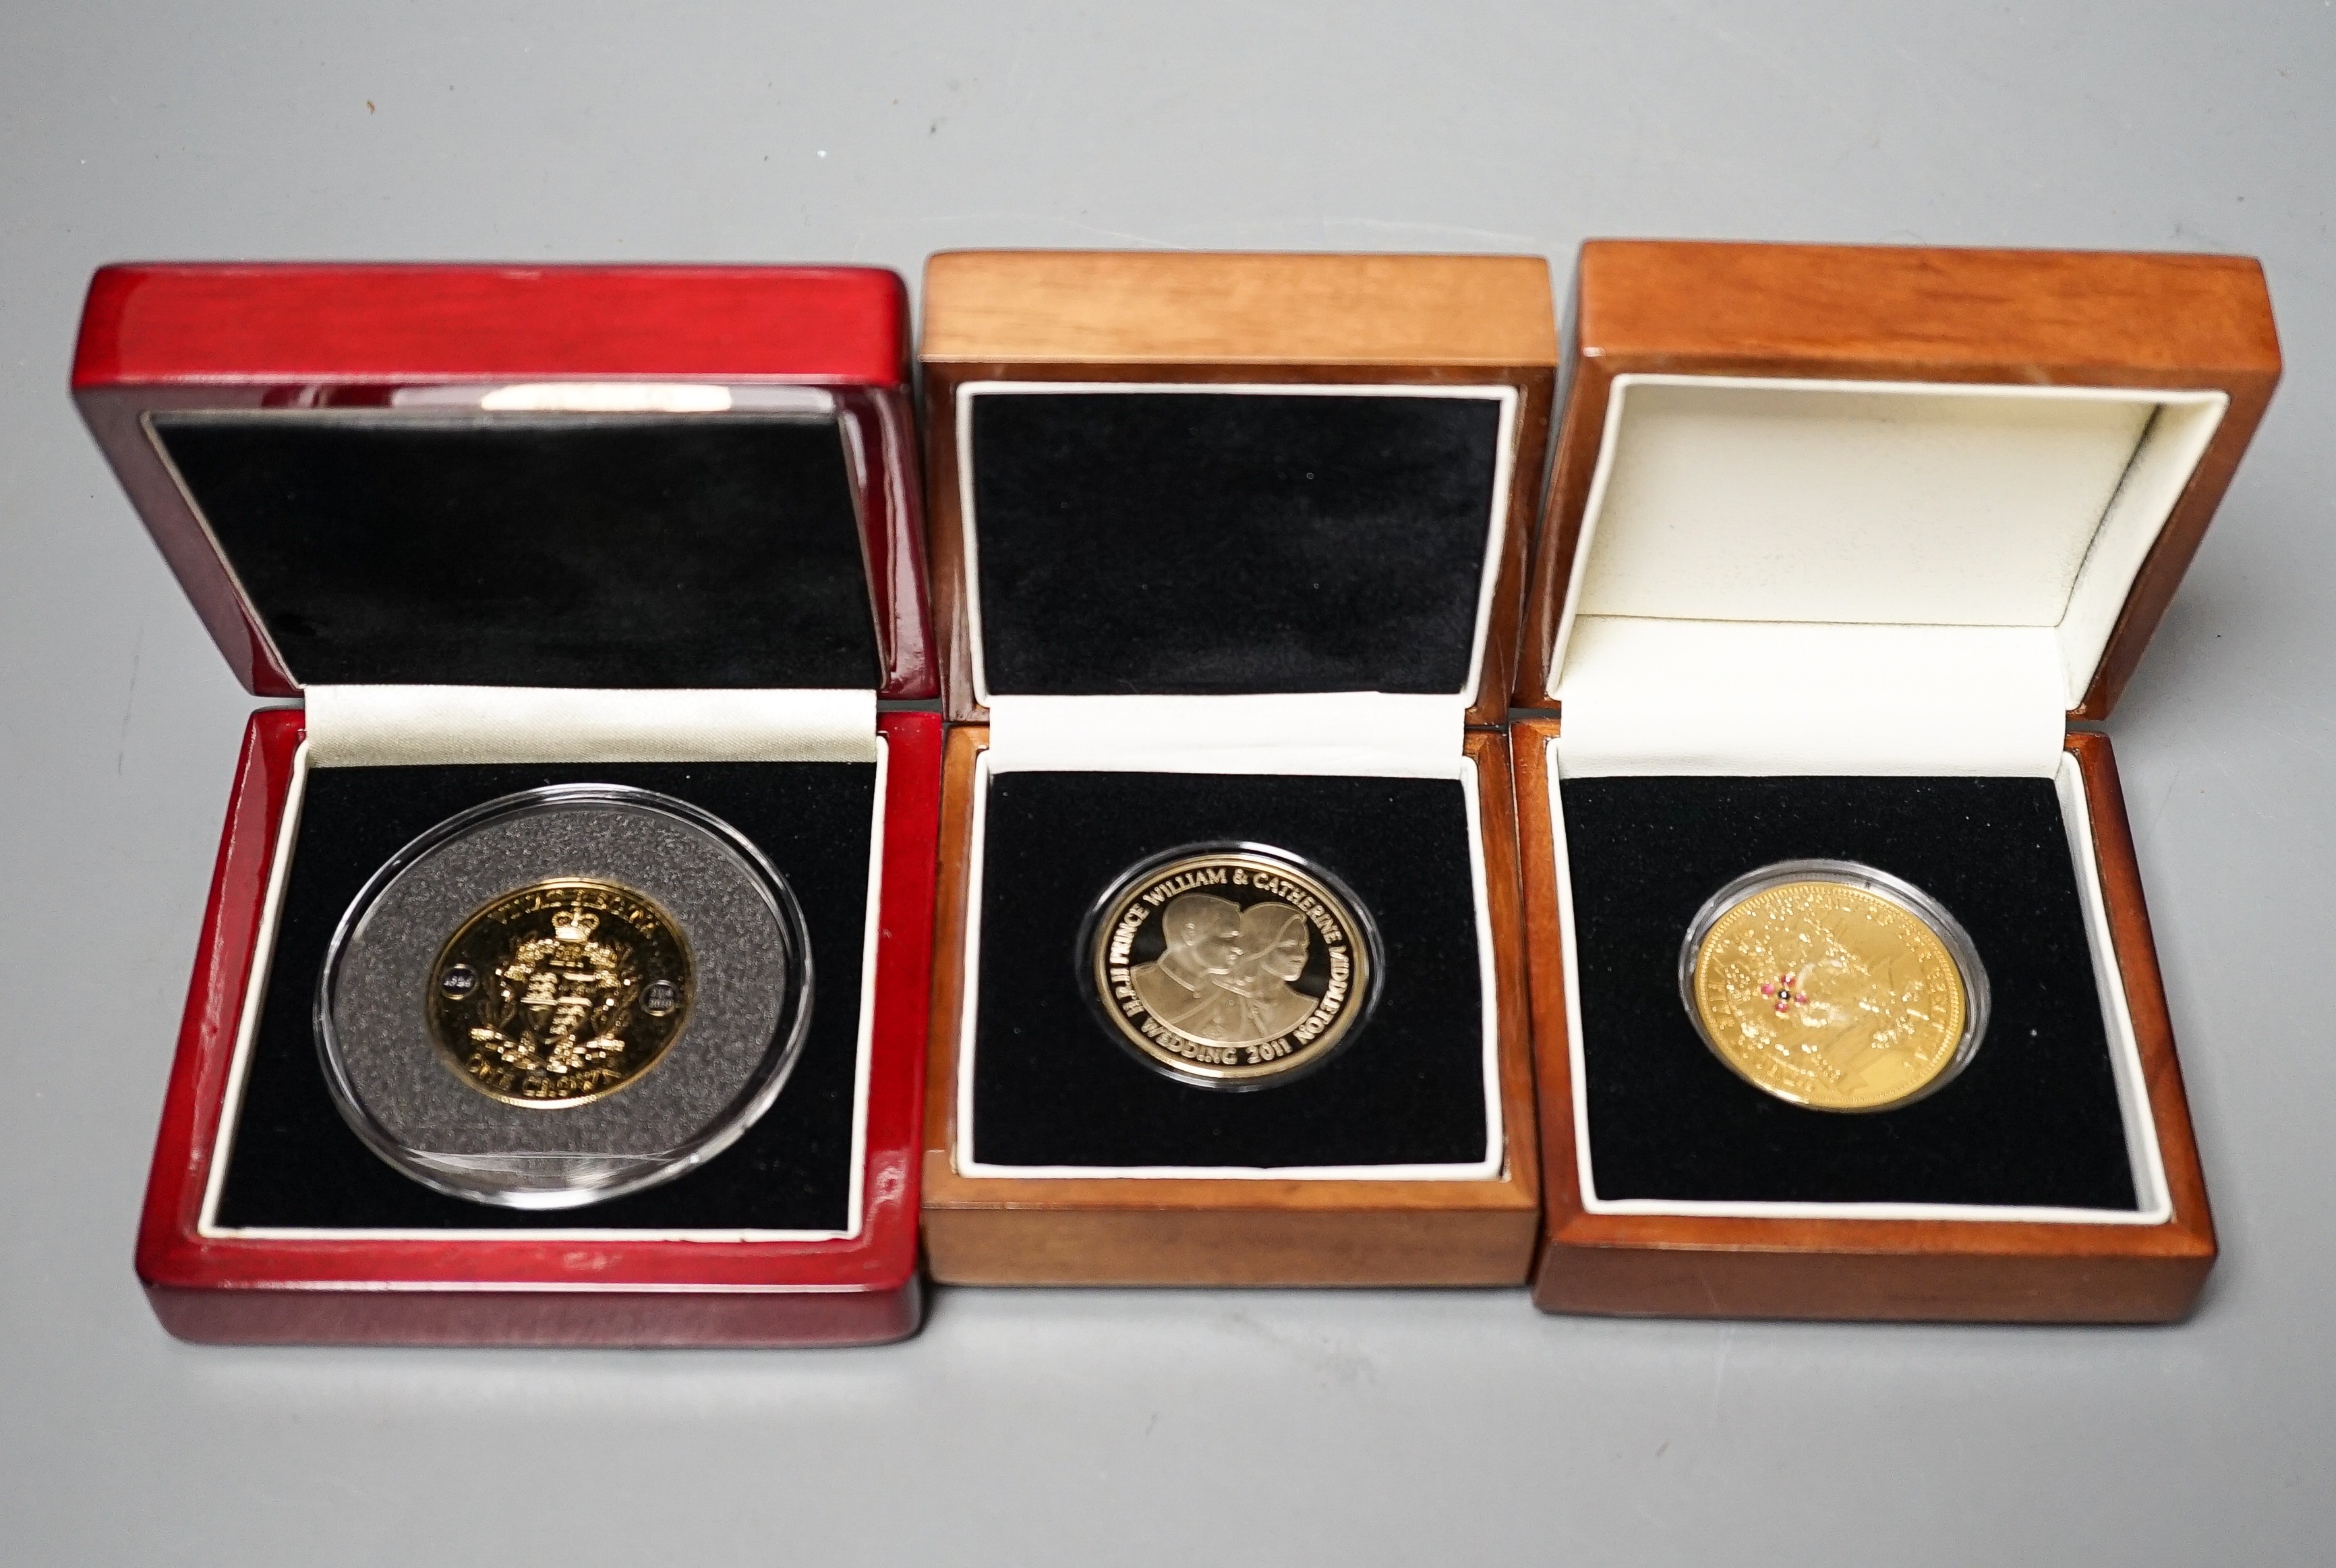 Four London mint silver coins - £5 2008, 2009, 2010 piedfort crown, William & Catherine silver coin 2011, together with two Victorian silver sixpences, cased with certificates (5)